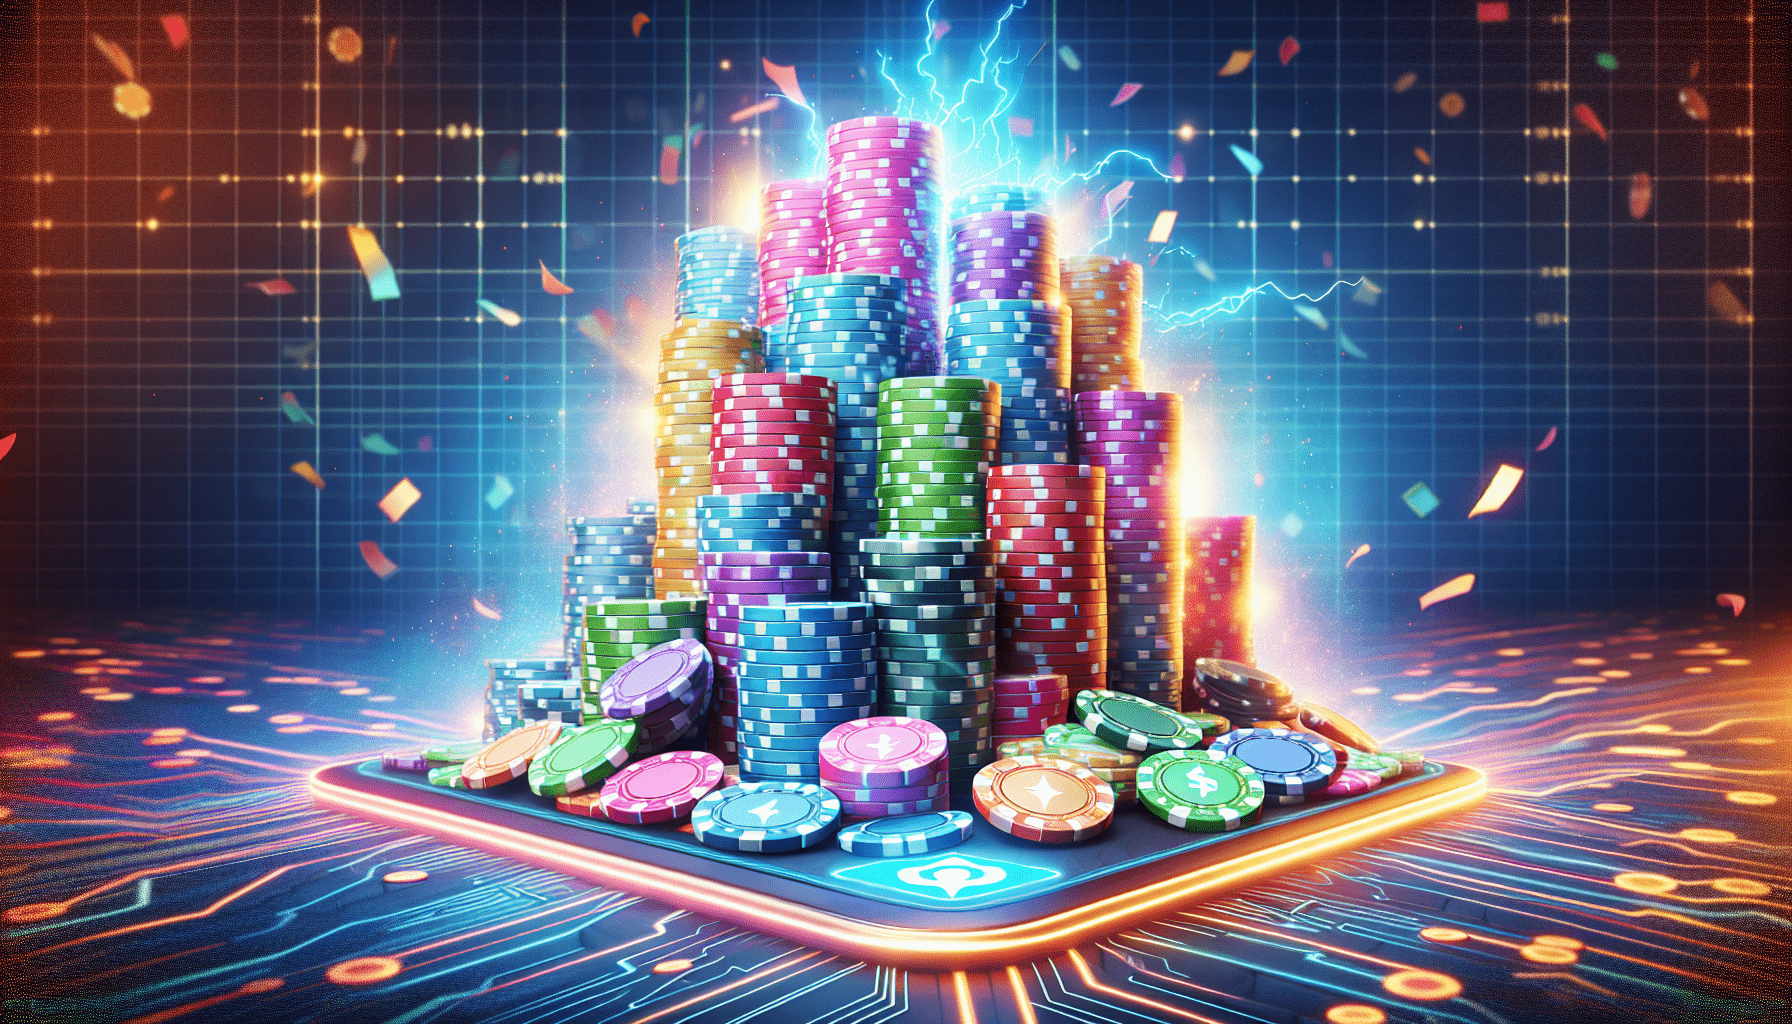 What Online Casino Has The Fast Payout?